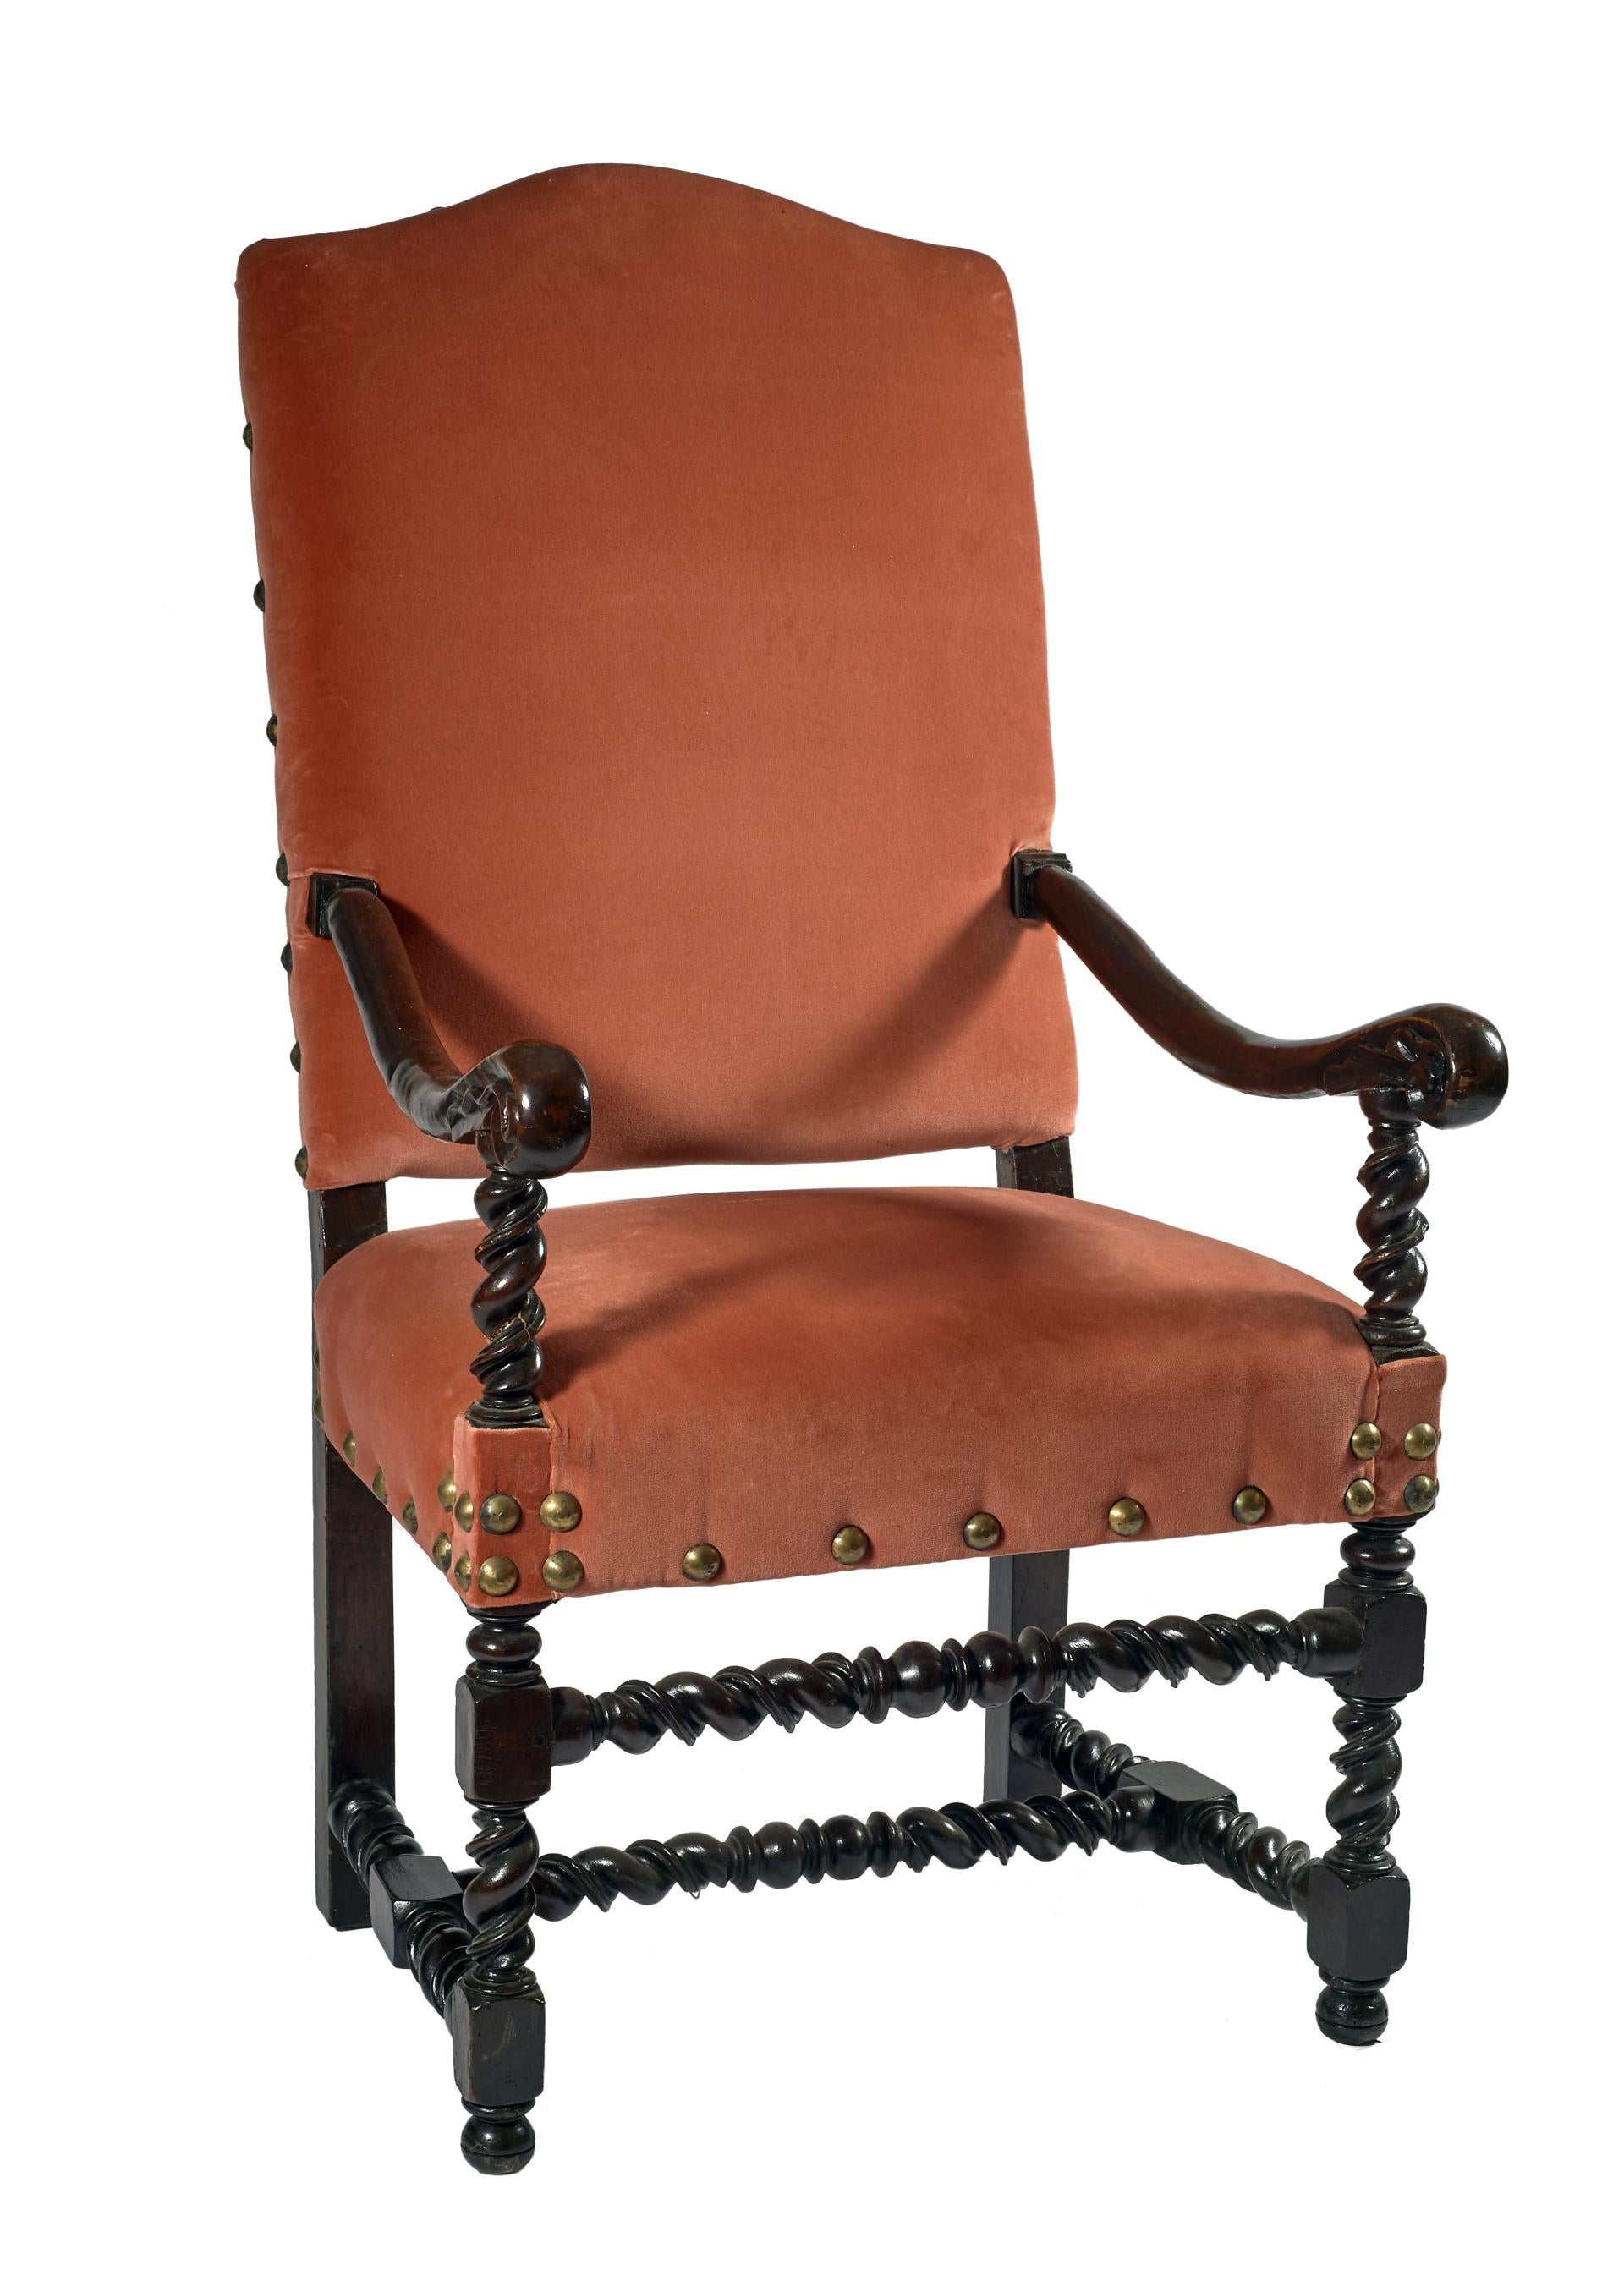 In the 17th century began to build chairs and armchairs in folders with some enrichment as the front legs and supports for the shaped or turned armrests. 

The carving of the wood and the folders becomes more vigorous than curls or scrolls and